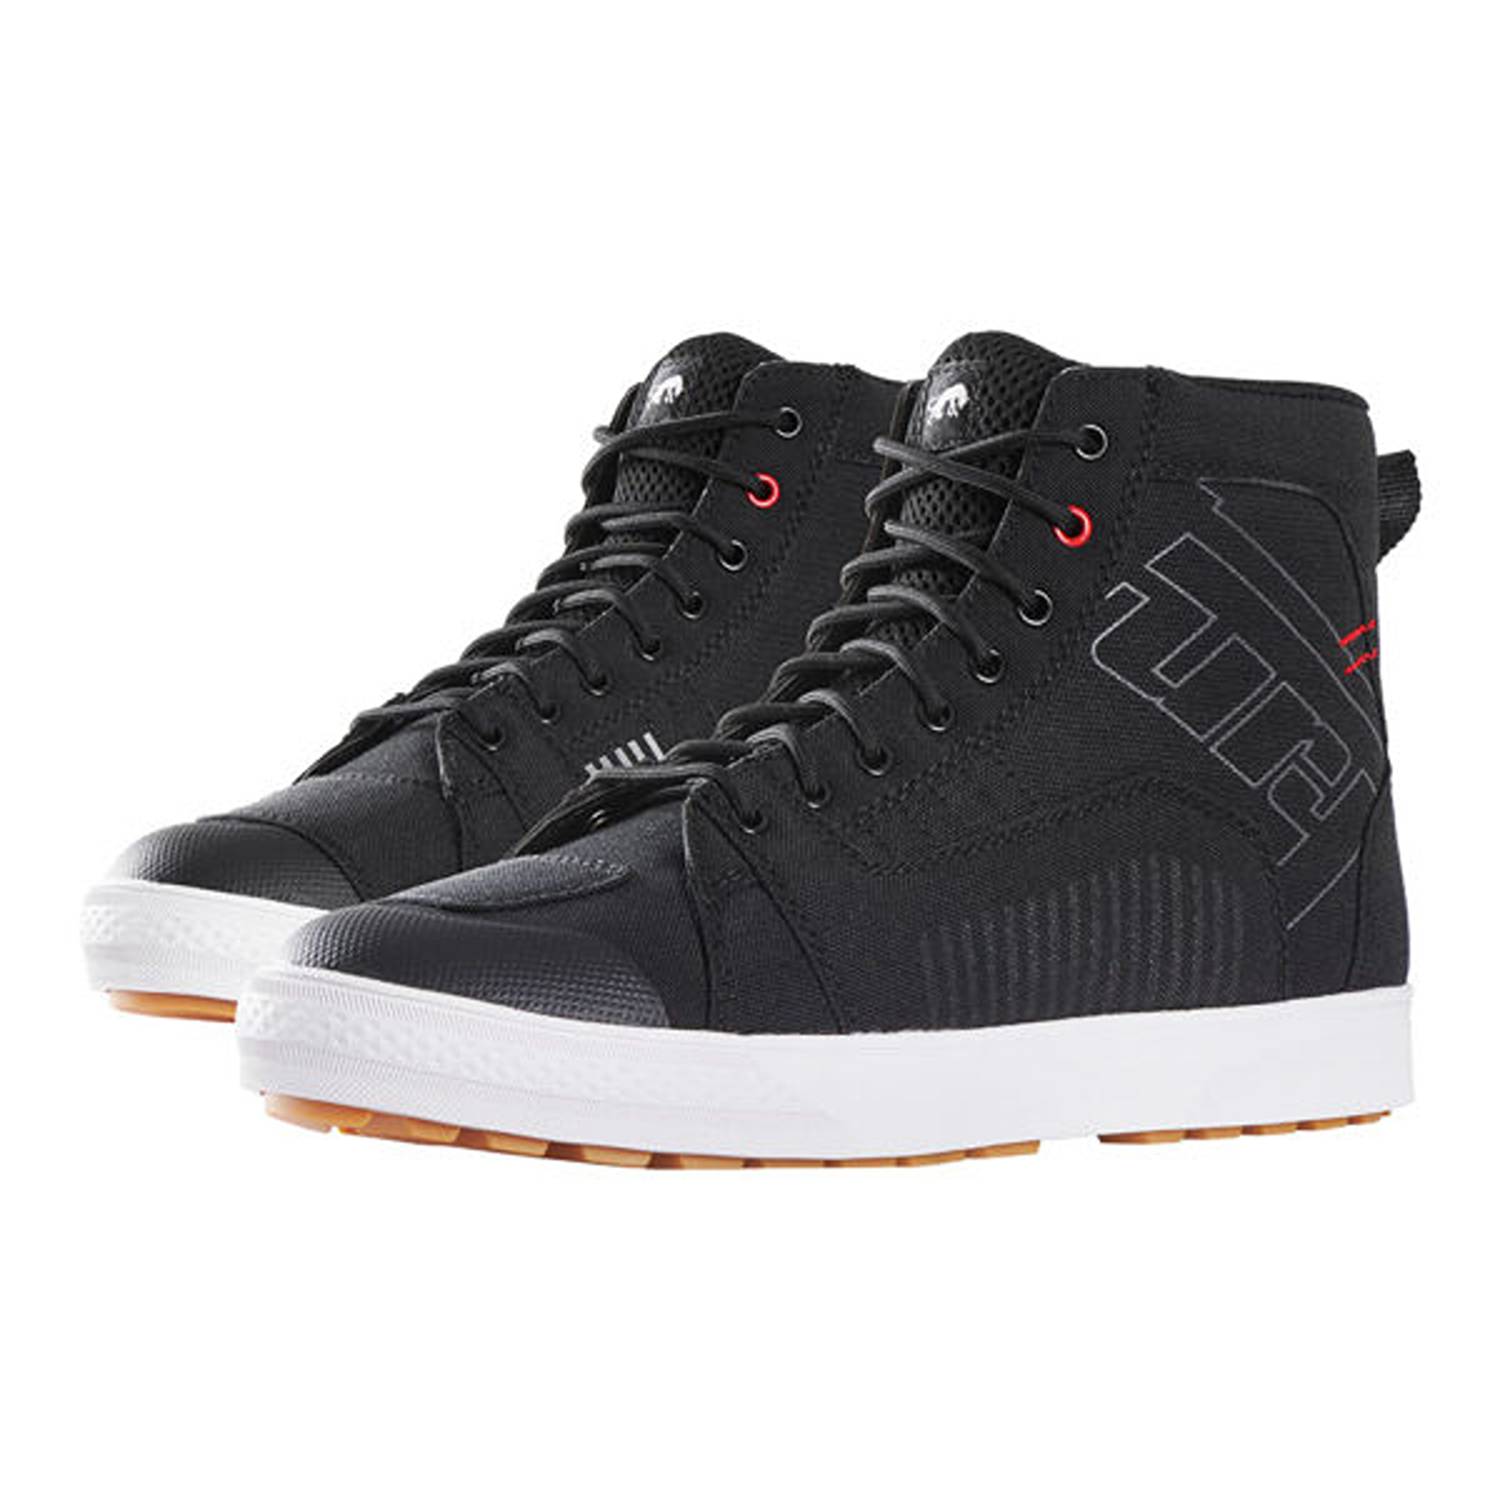 Image of EU Furygan Stockton Air D30 Shoes Black Red Taille 44